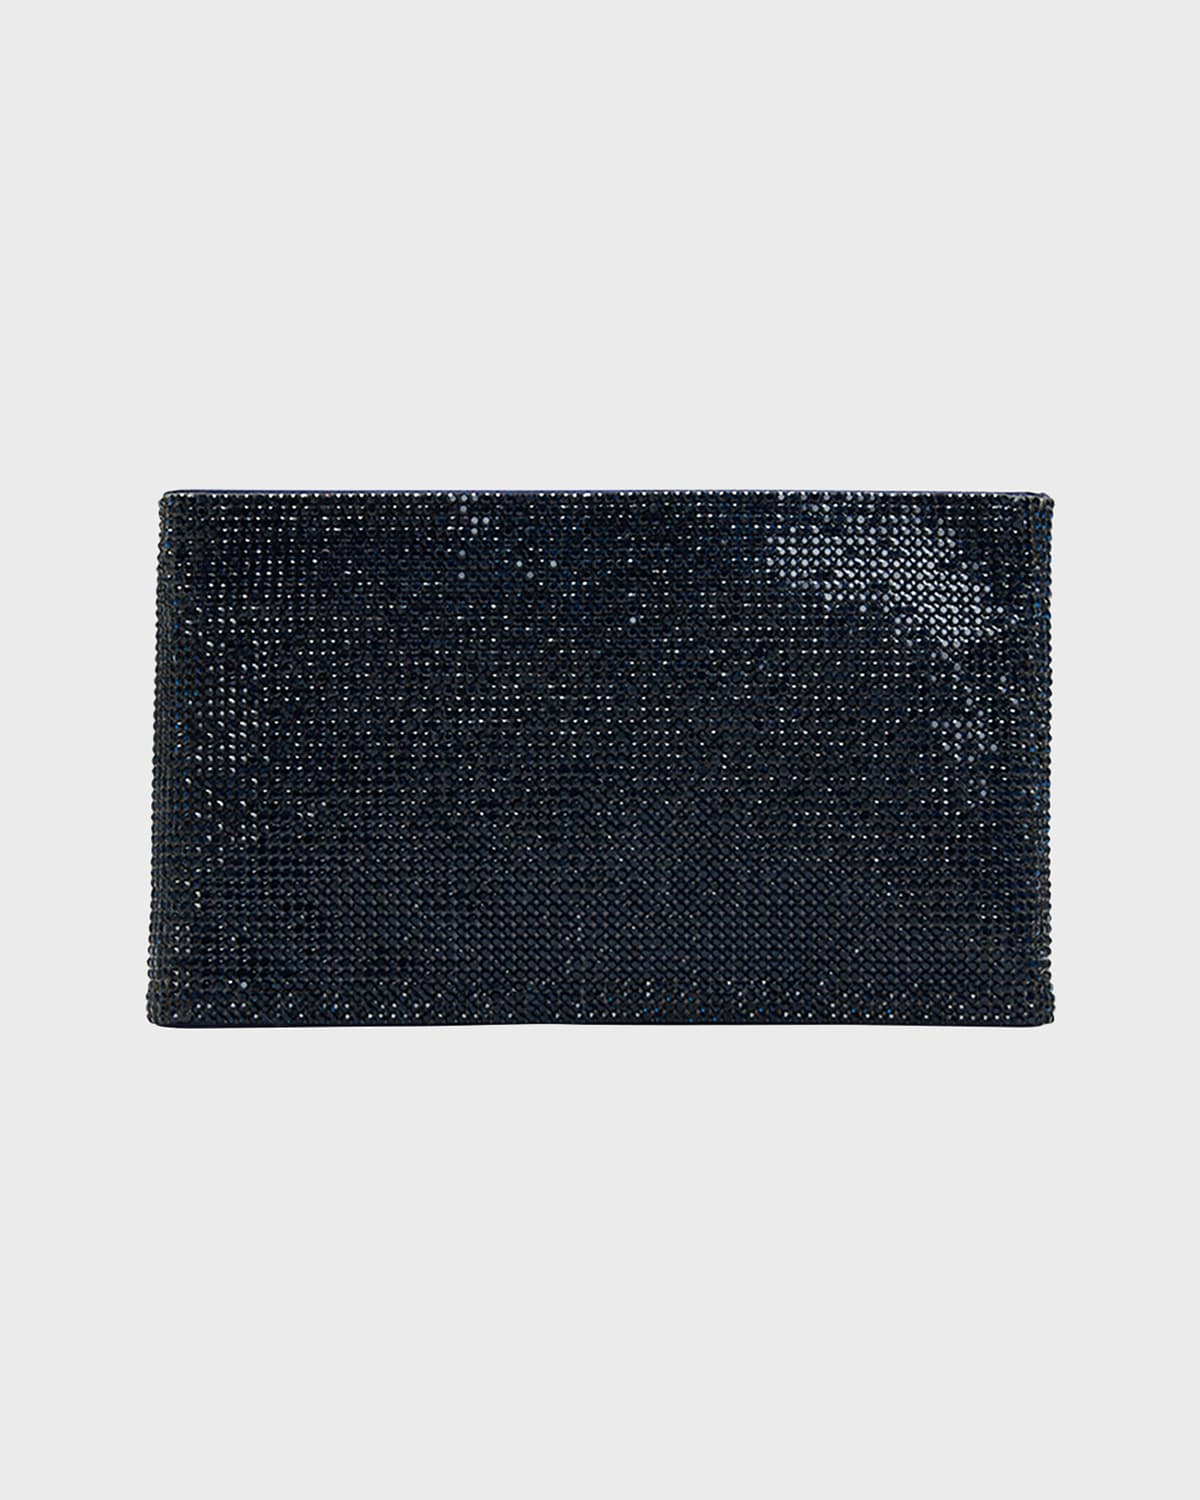 Judith Leiber Allover Crystal Zip Pouch Clutch Bag In Black